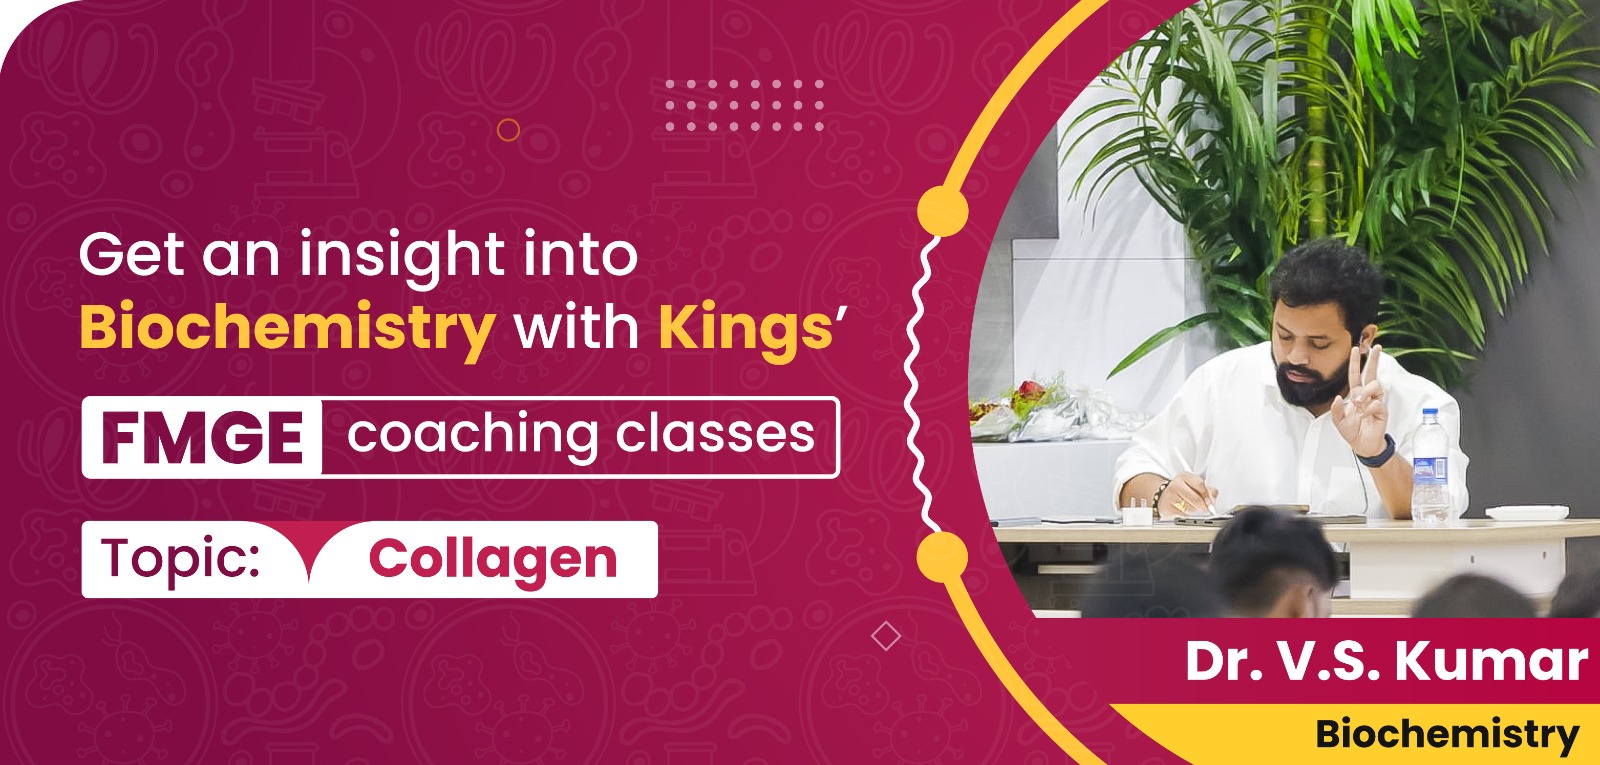 Get an insight into Biochemistry with Kings’ FMGE coaching classes